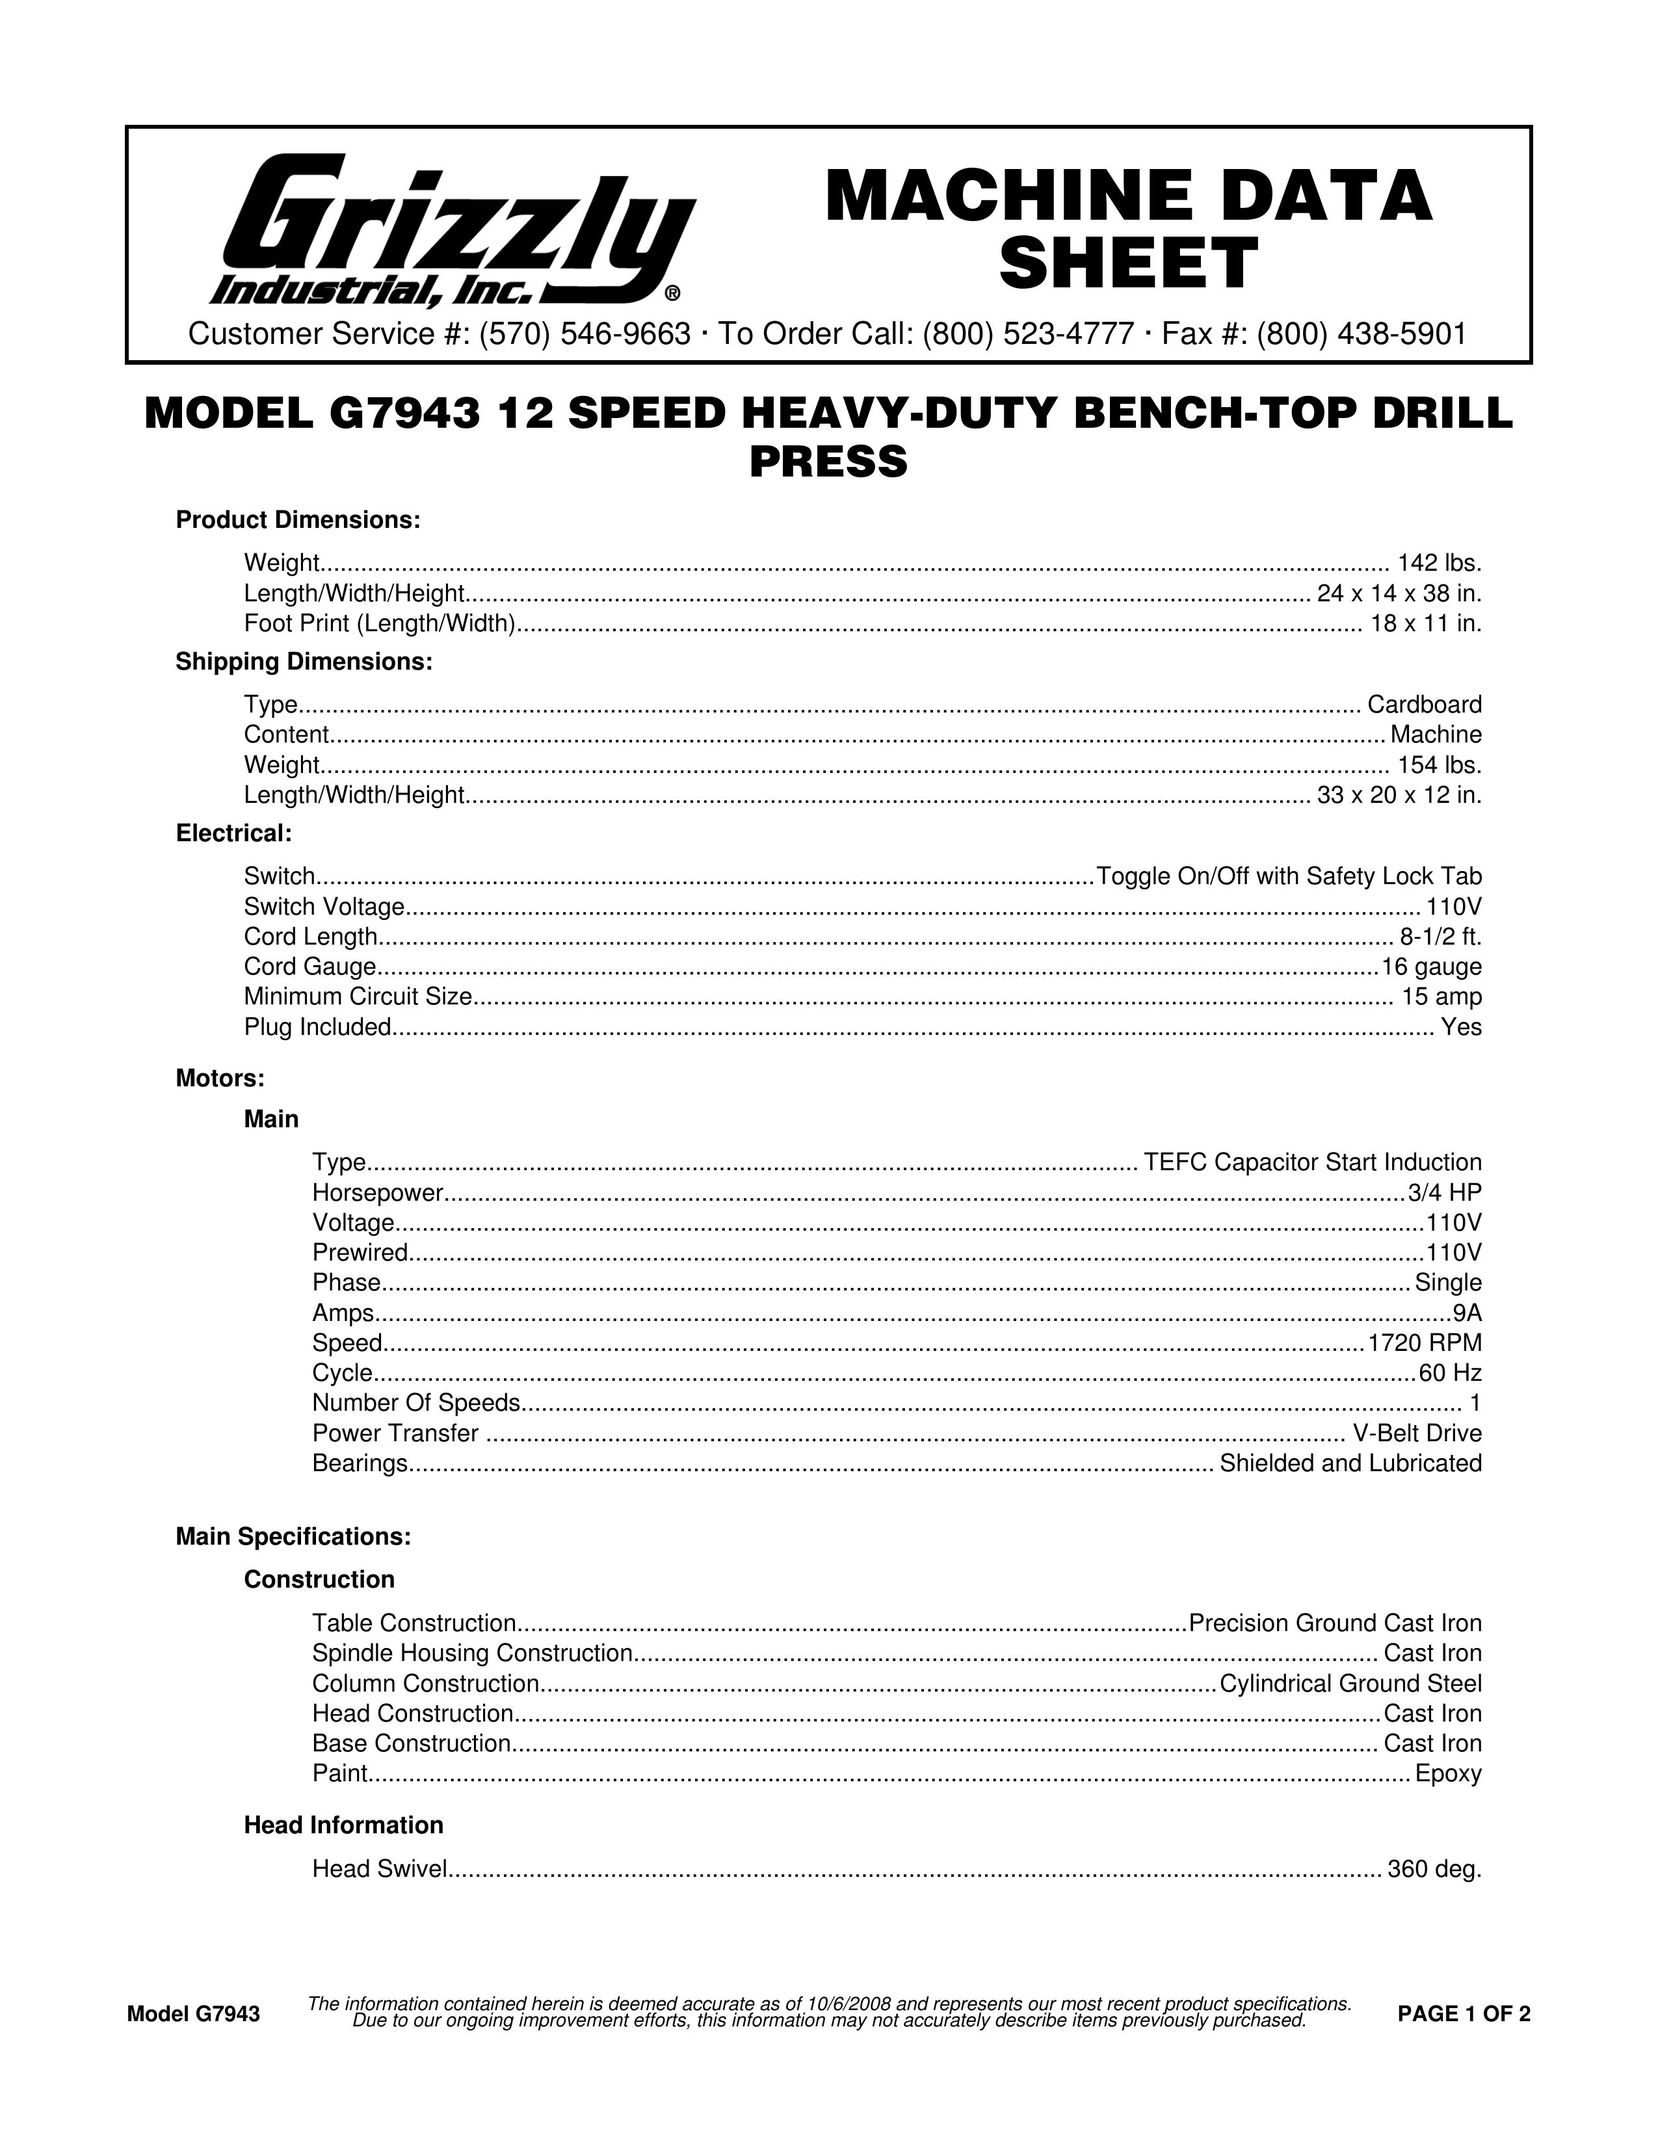 Grizzly G7943 Drill User Manual